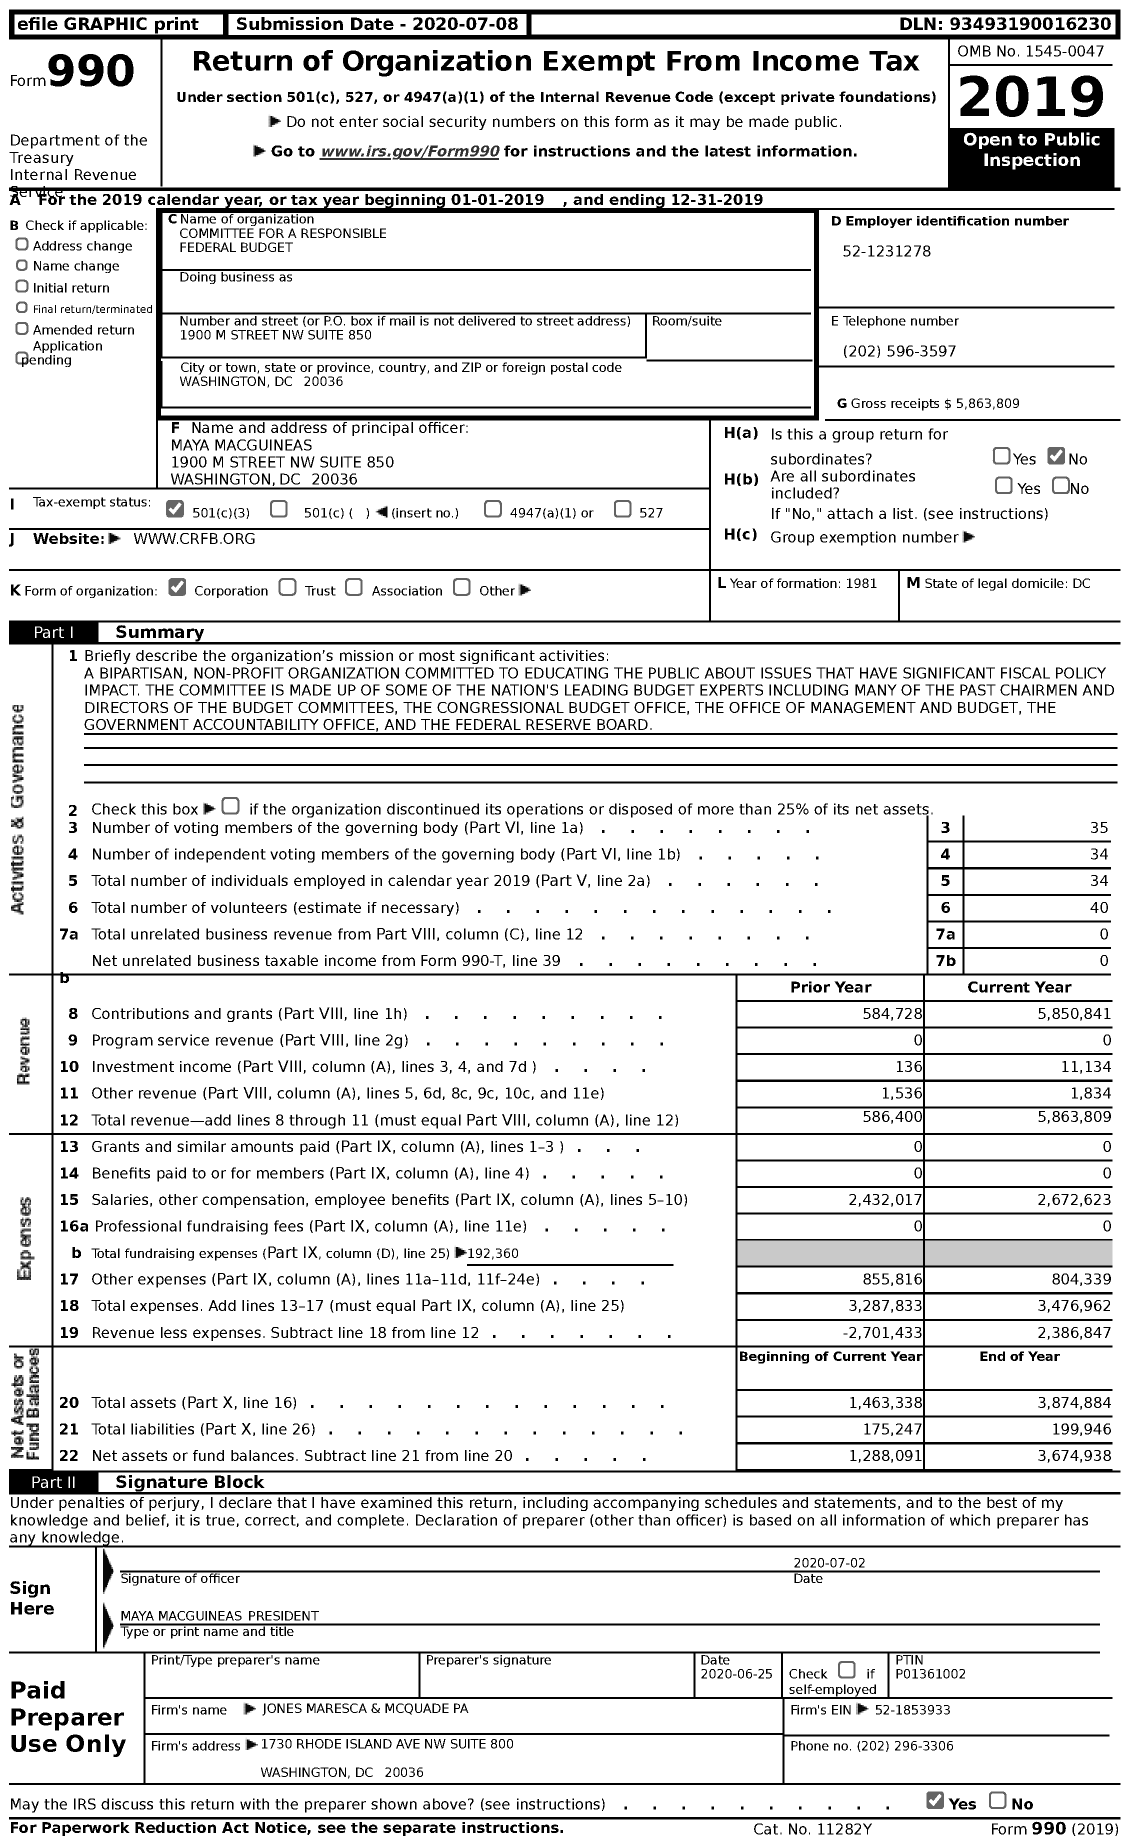 Image of first page of 2019 Form 990 for Committee for A Responsible Federal Budget